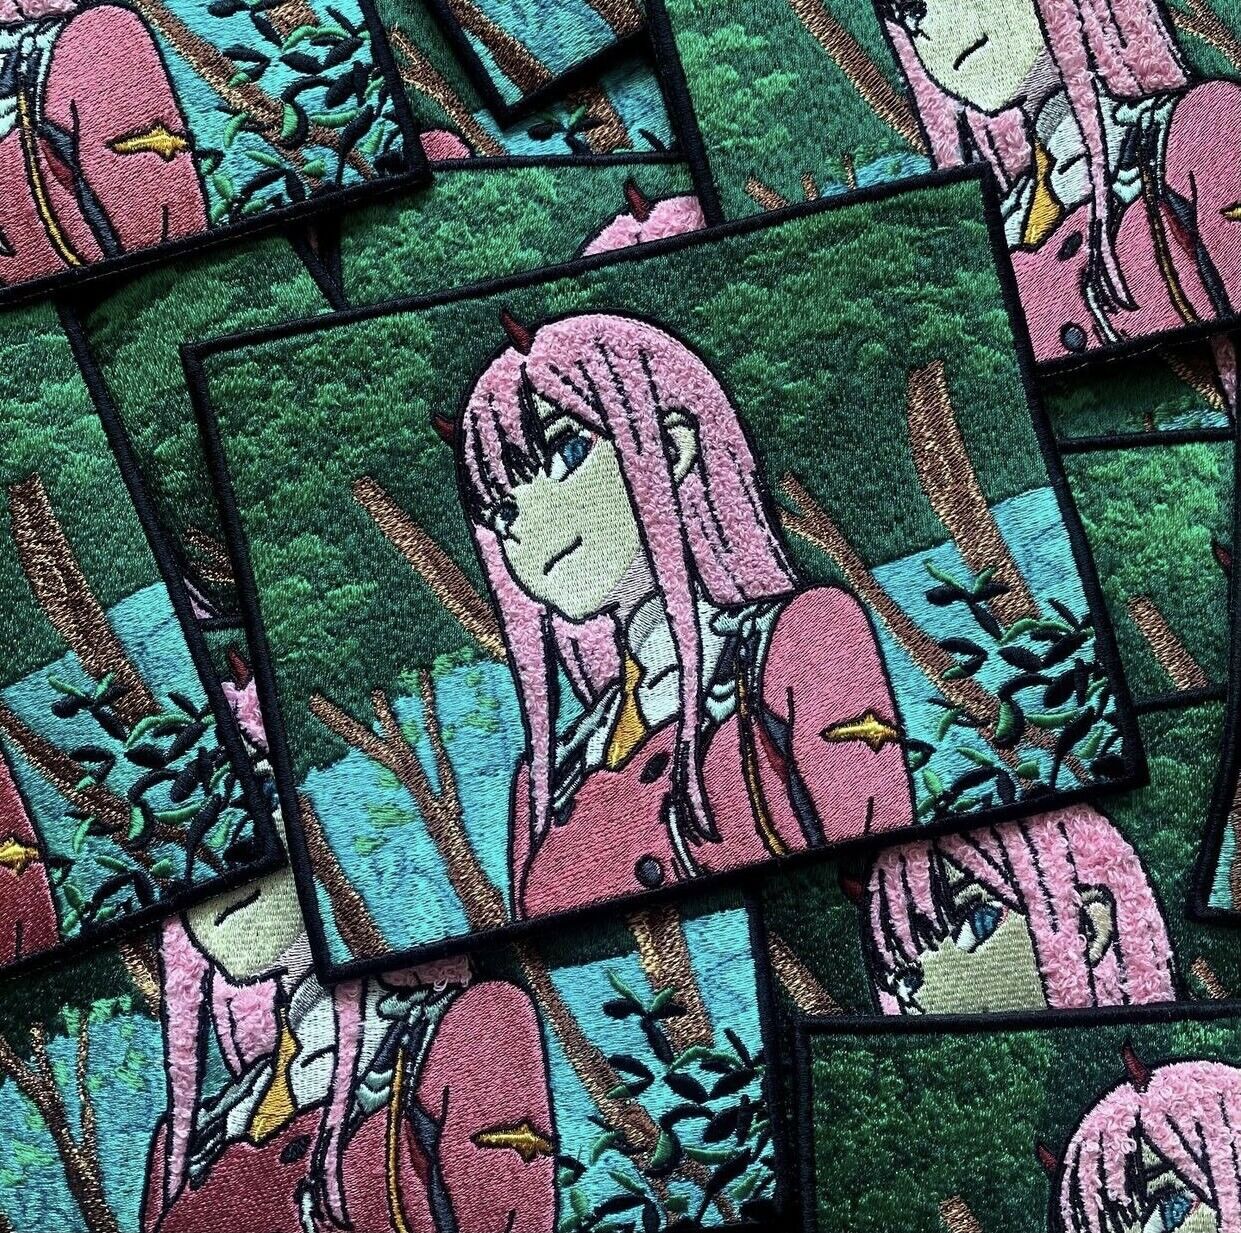 ZERO TWO PATCH DARLING IN THE FRANXX CHENILLE/EMBROIDERED 6.5x5 INCH